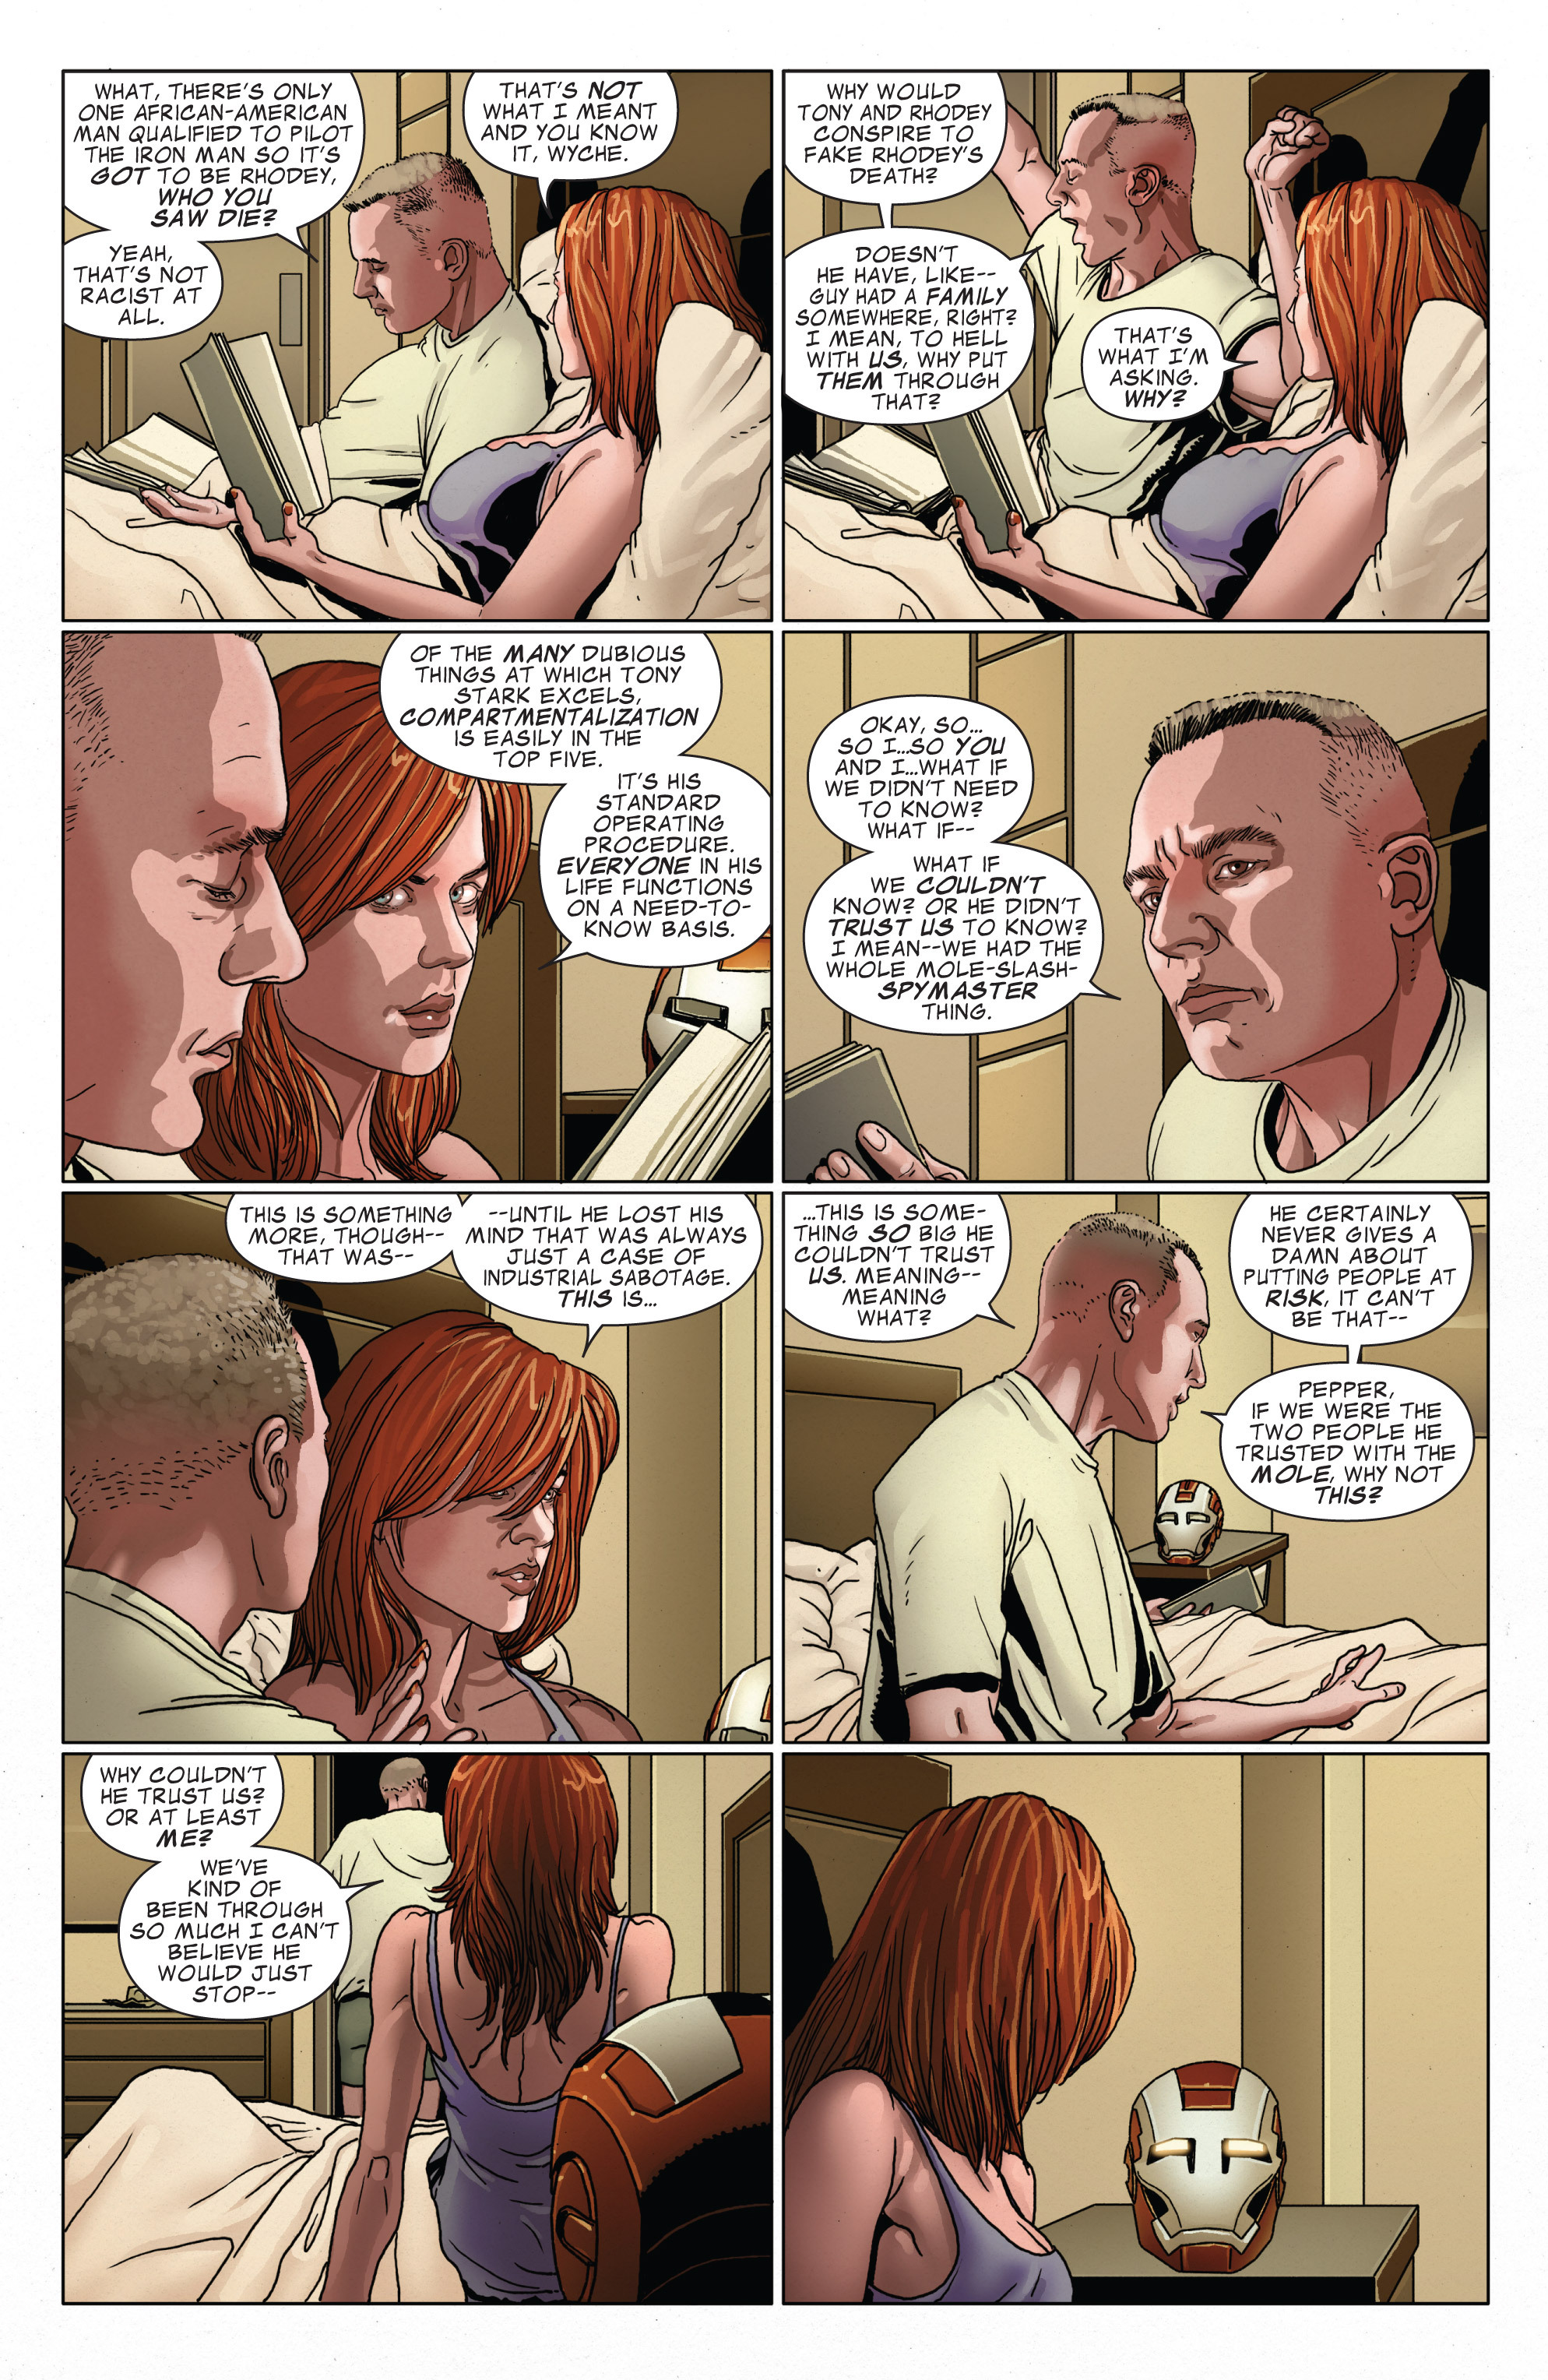 Invincible Iron Man (2008) 523 Page 13